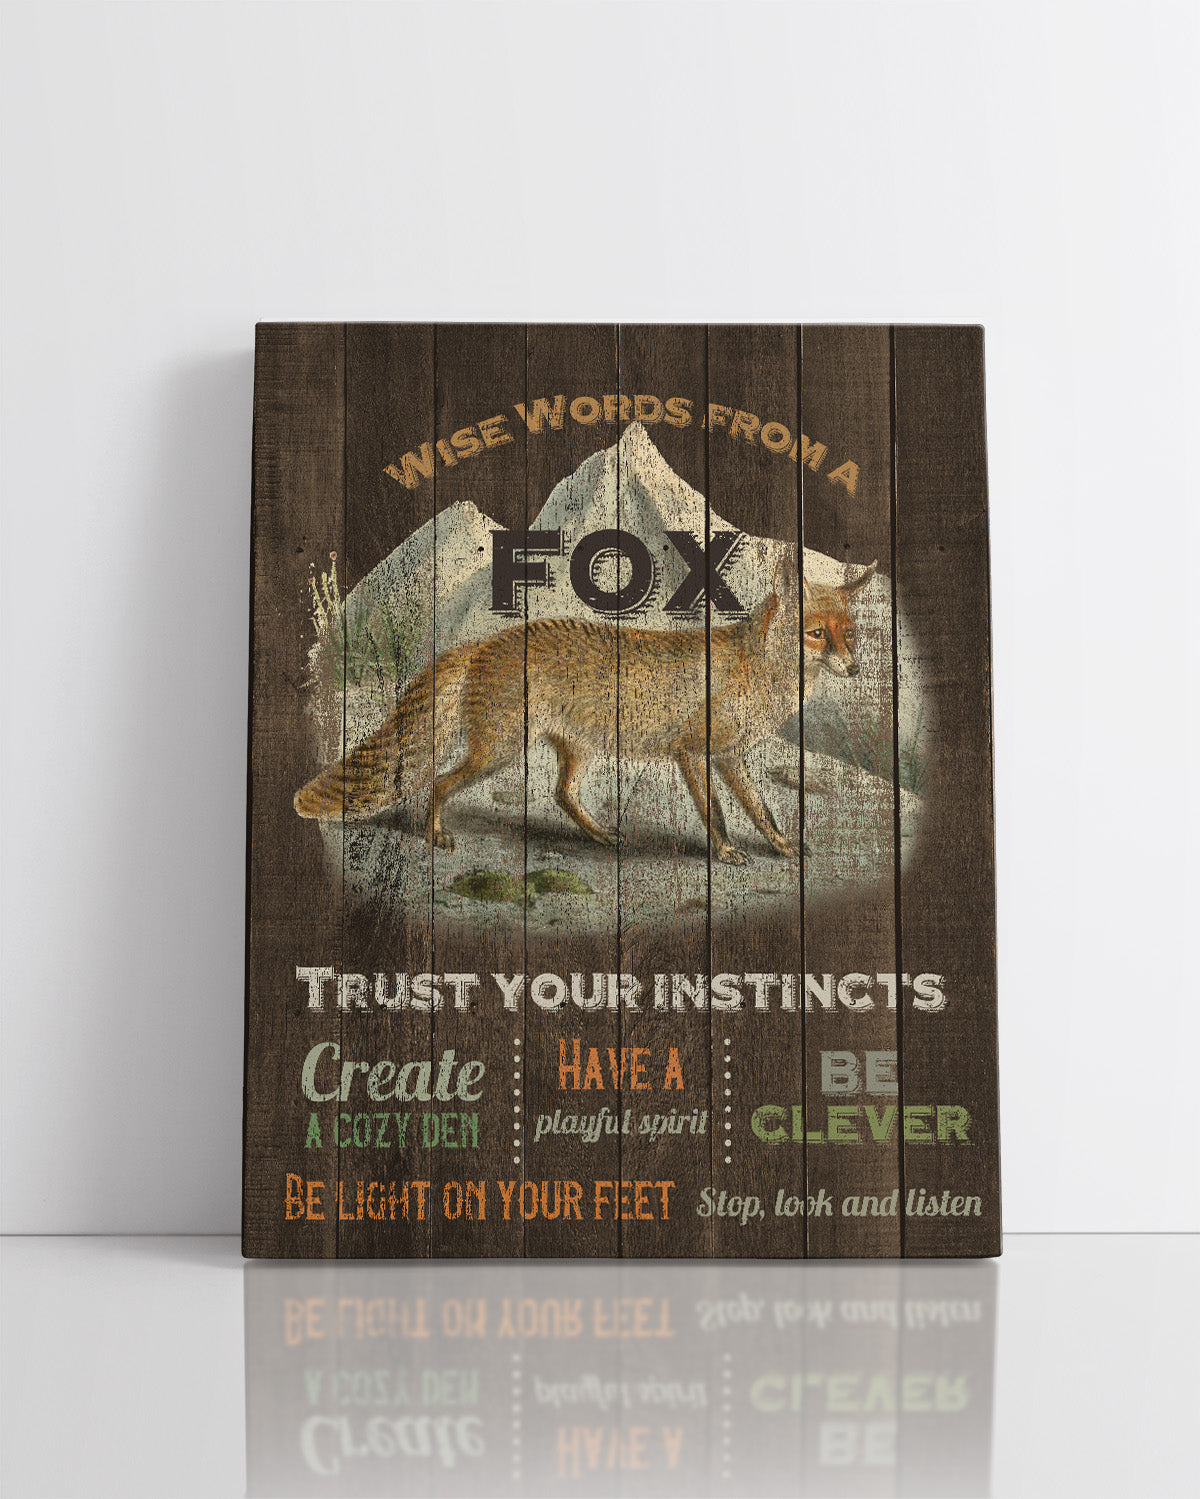 Wise Words From A Fox - Motivational Fox Wall Art Decor Print with a brown background